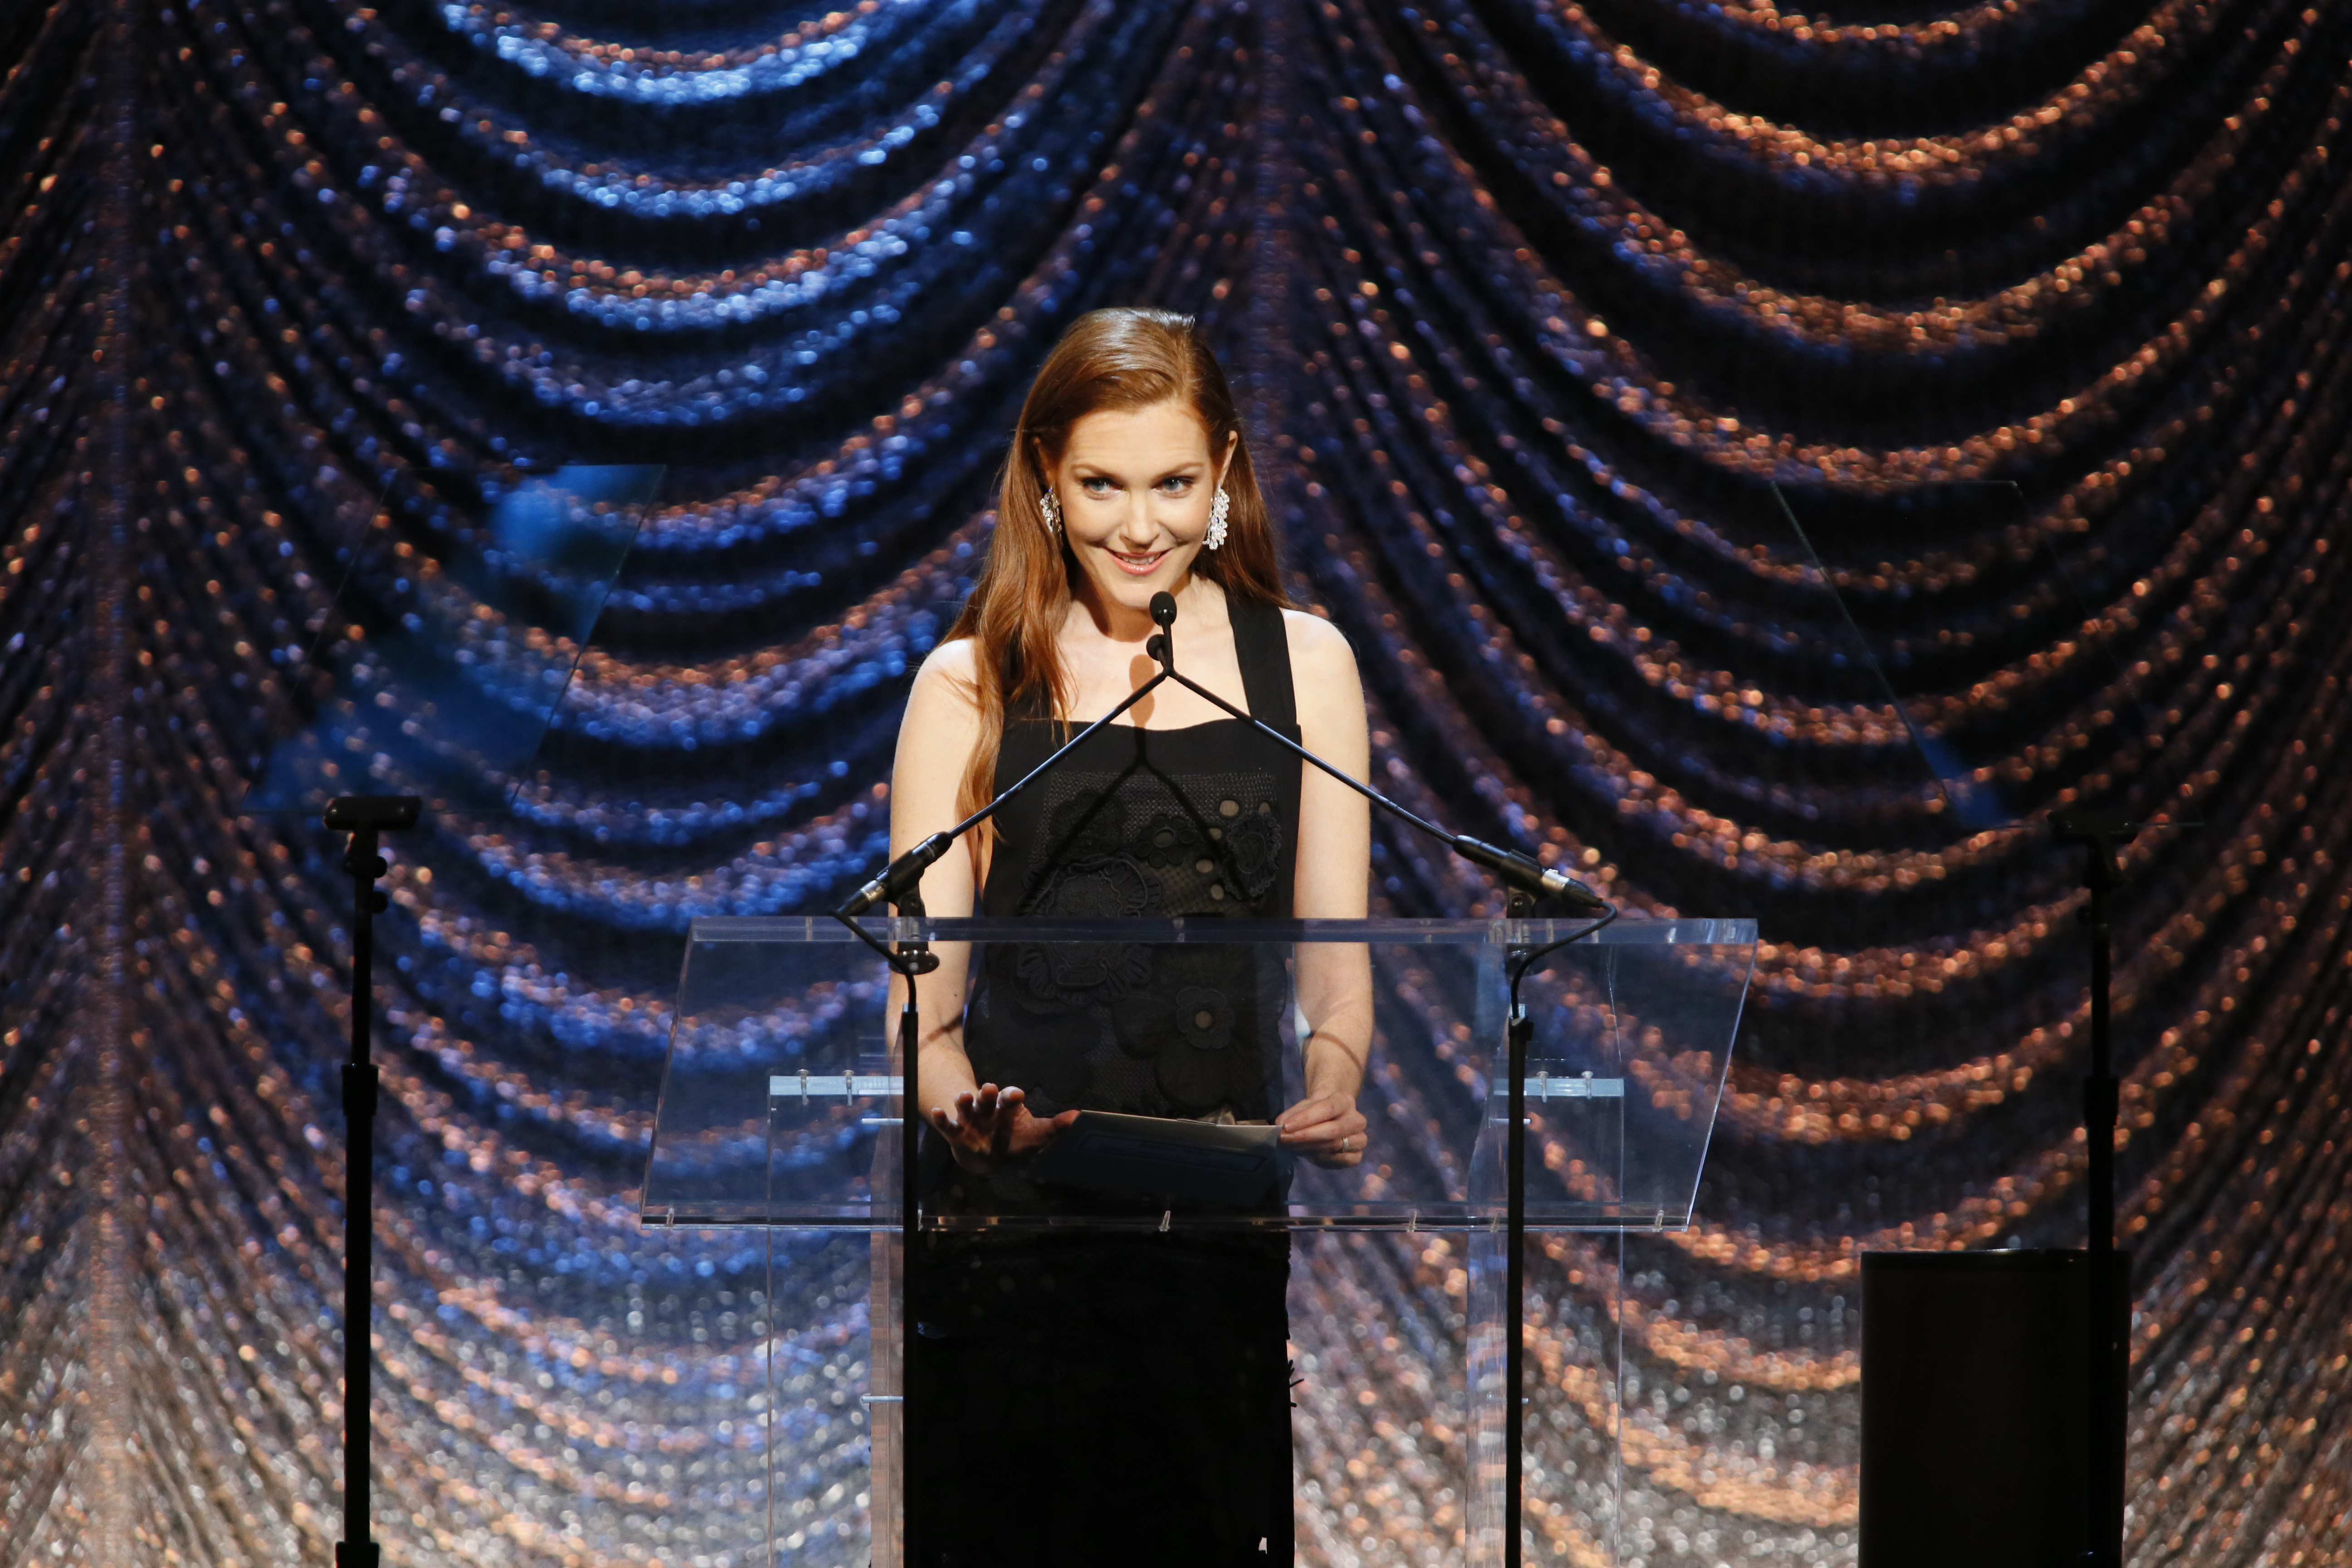 Presenter Darby Stanchfield announces the winner for Regular Series for Non-Commercial Television.